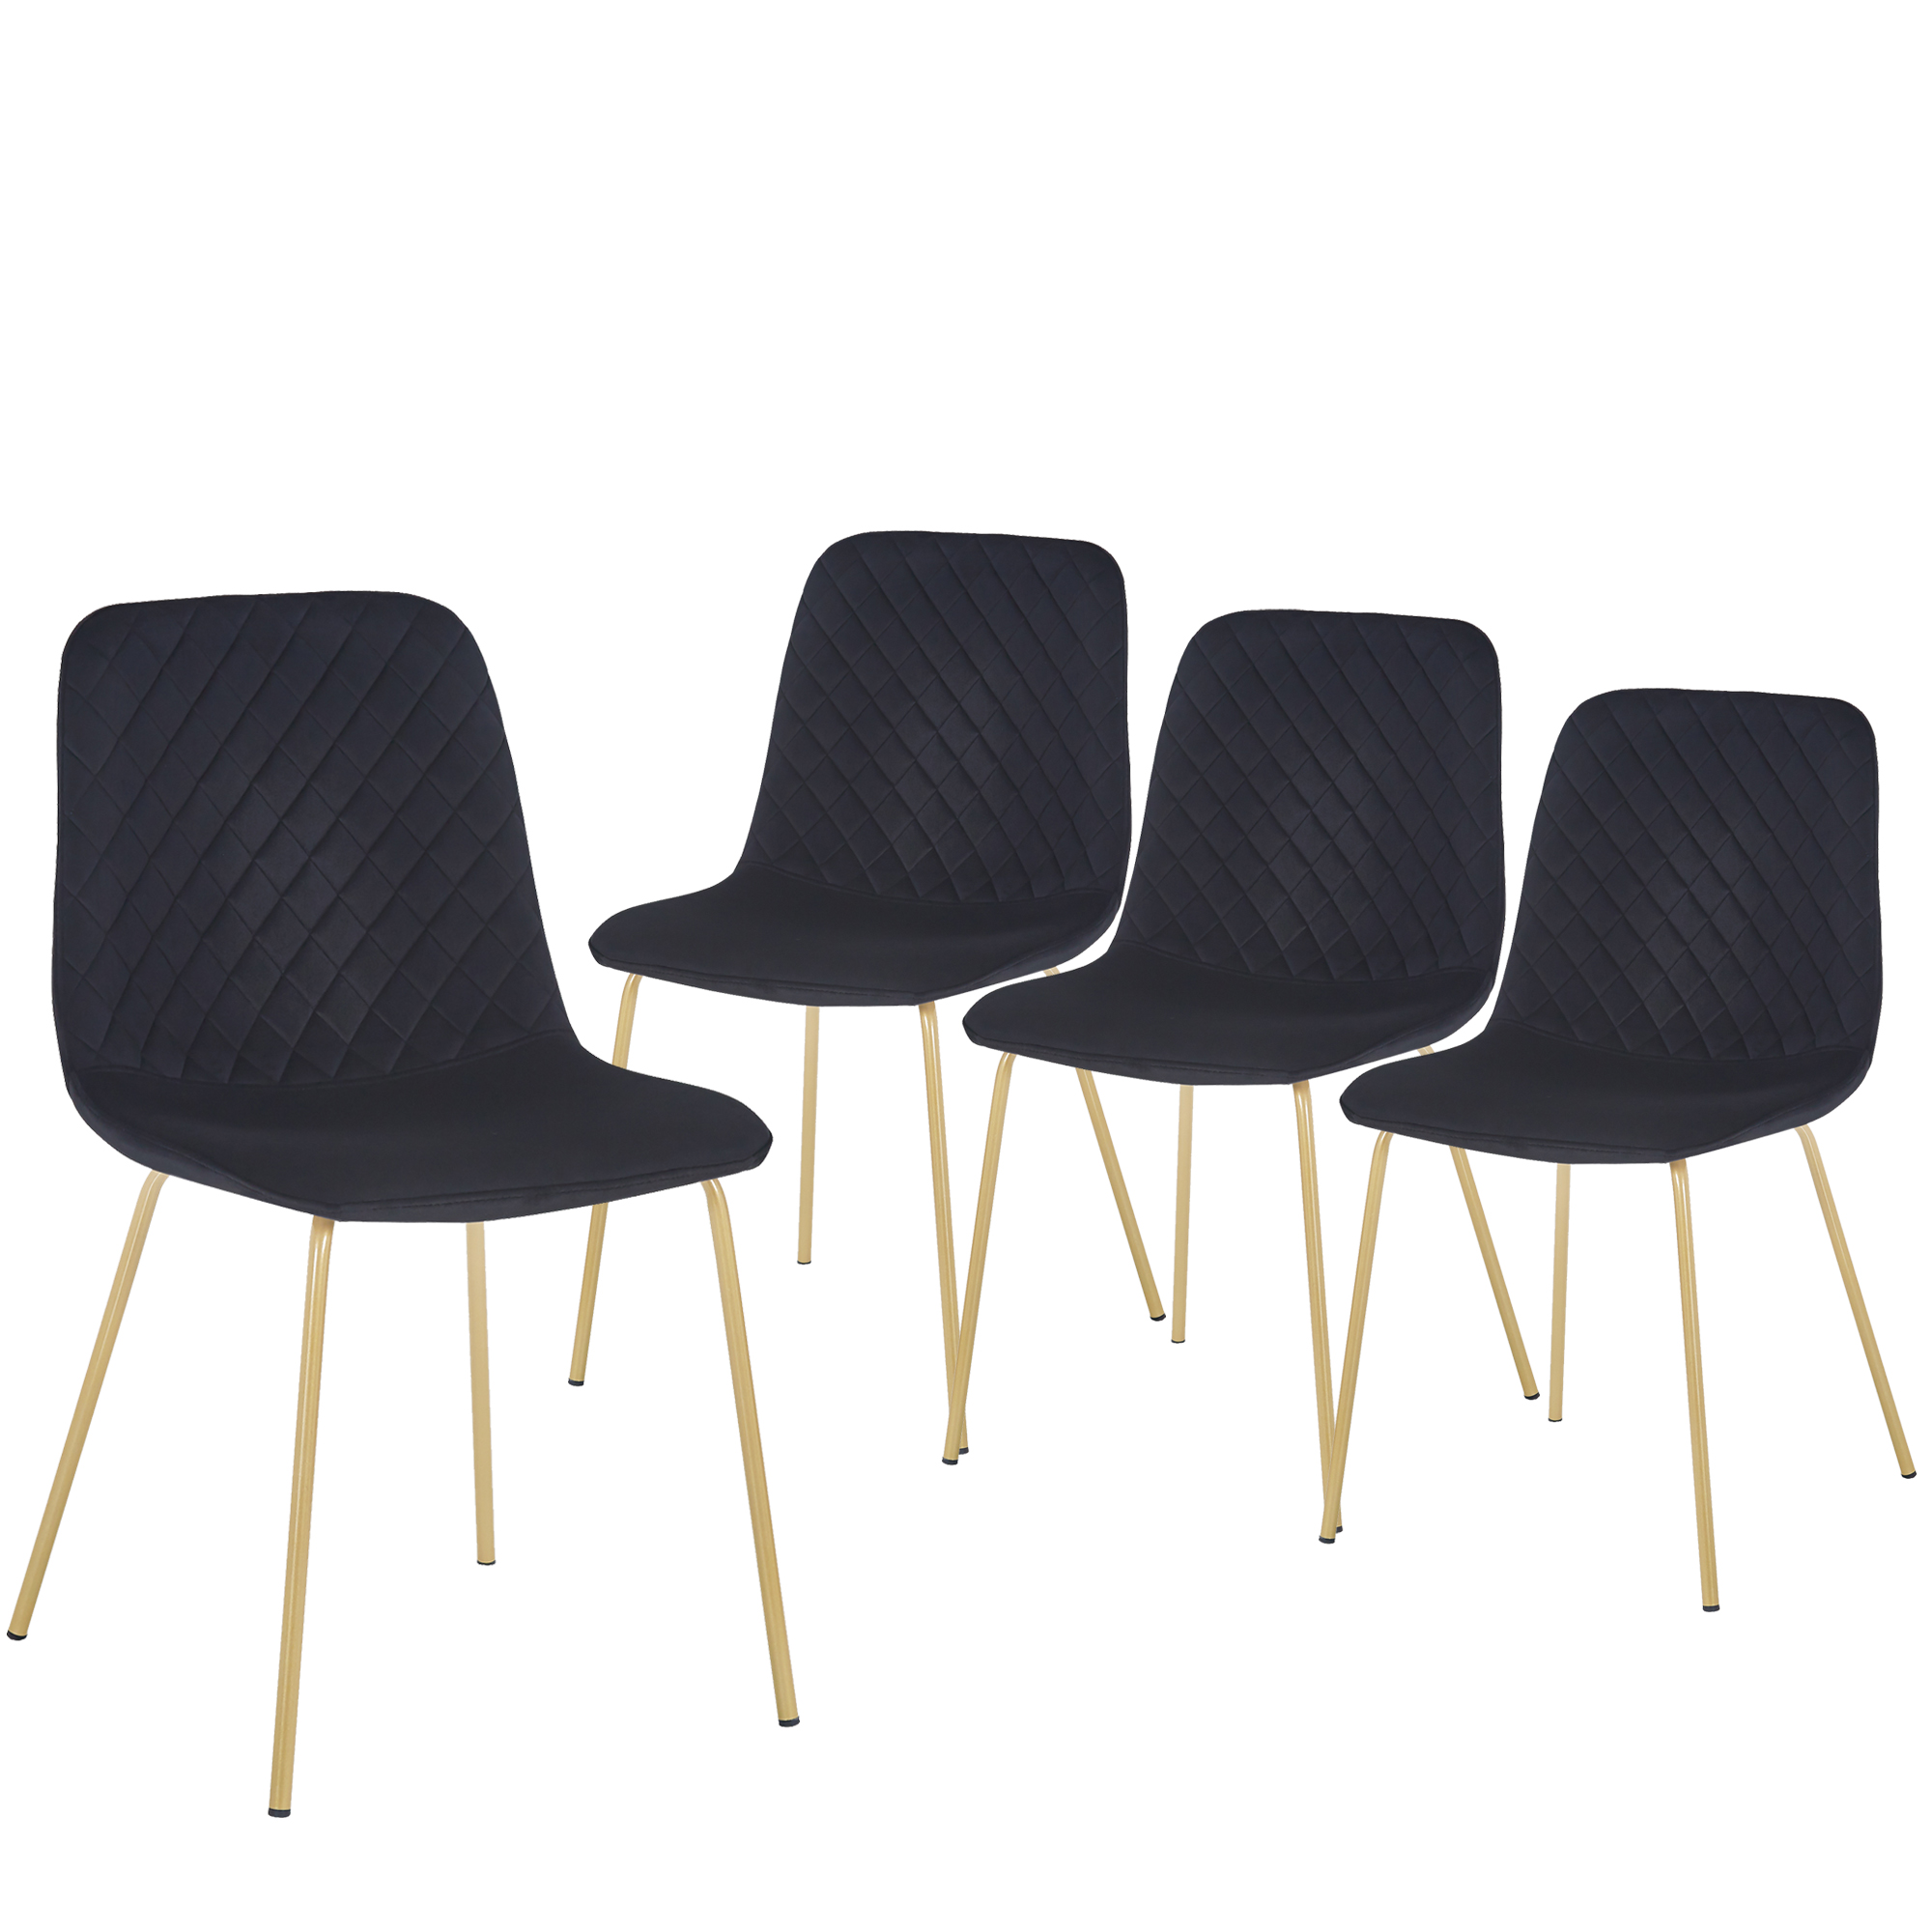 Dining chair  set of 4 PCS（BLACK），Modern style，New technology，Suitable for restaurants, cafes, taverns, offices, living rooms, reception rooms.Simple structure, easy installation.-Boyel Living